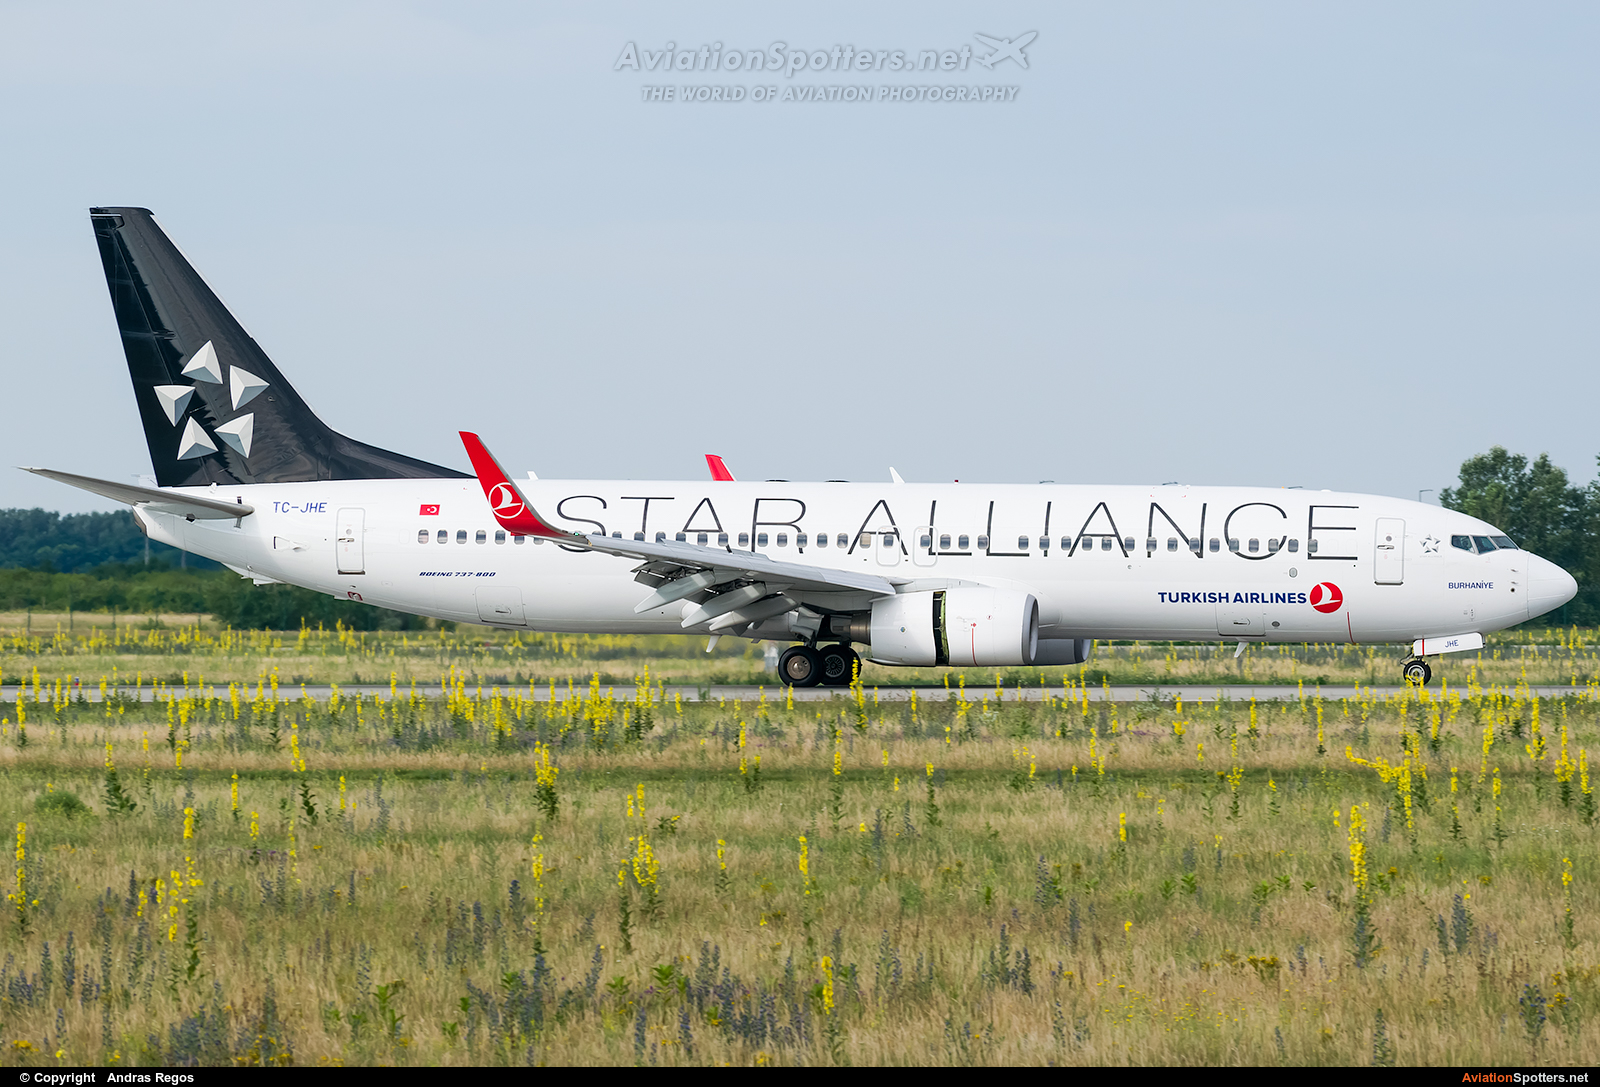 Turkish Airlines  -  737-800  (TC-JHE) By Andras Regos (regos)